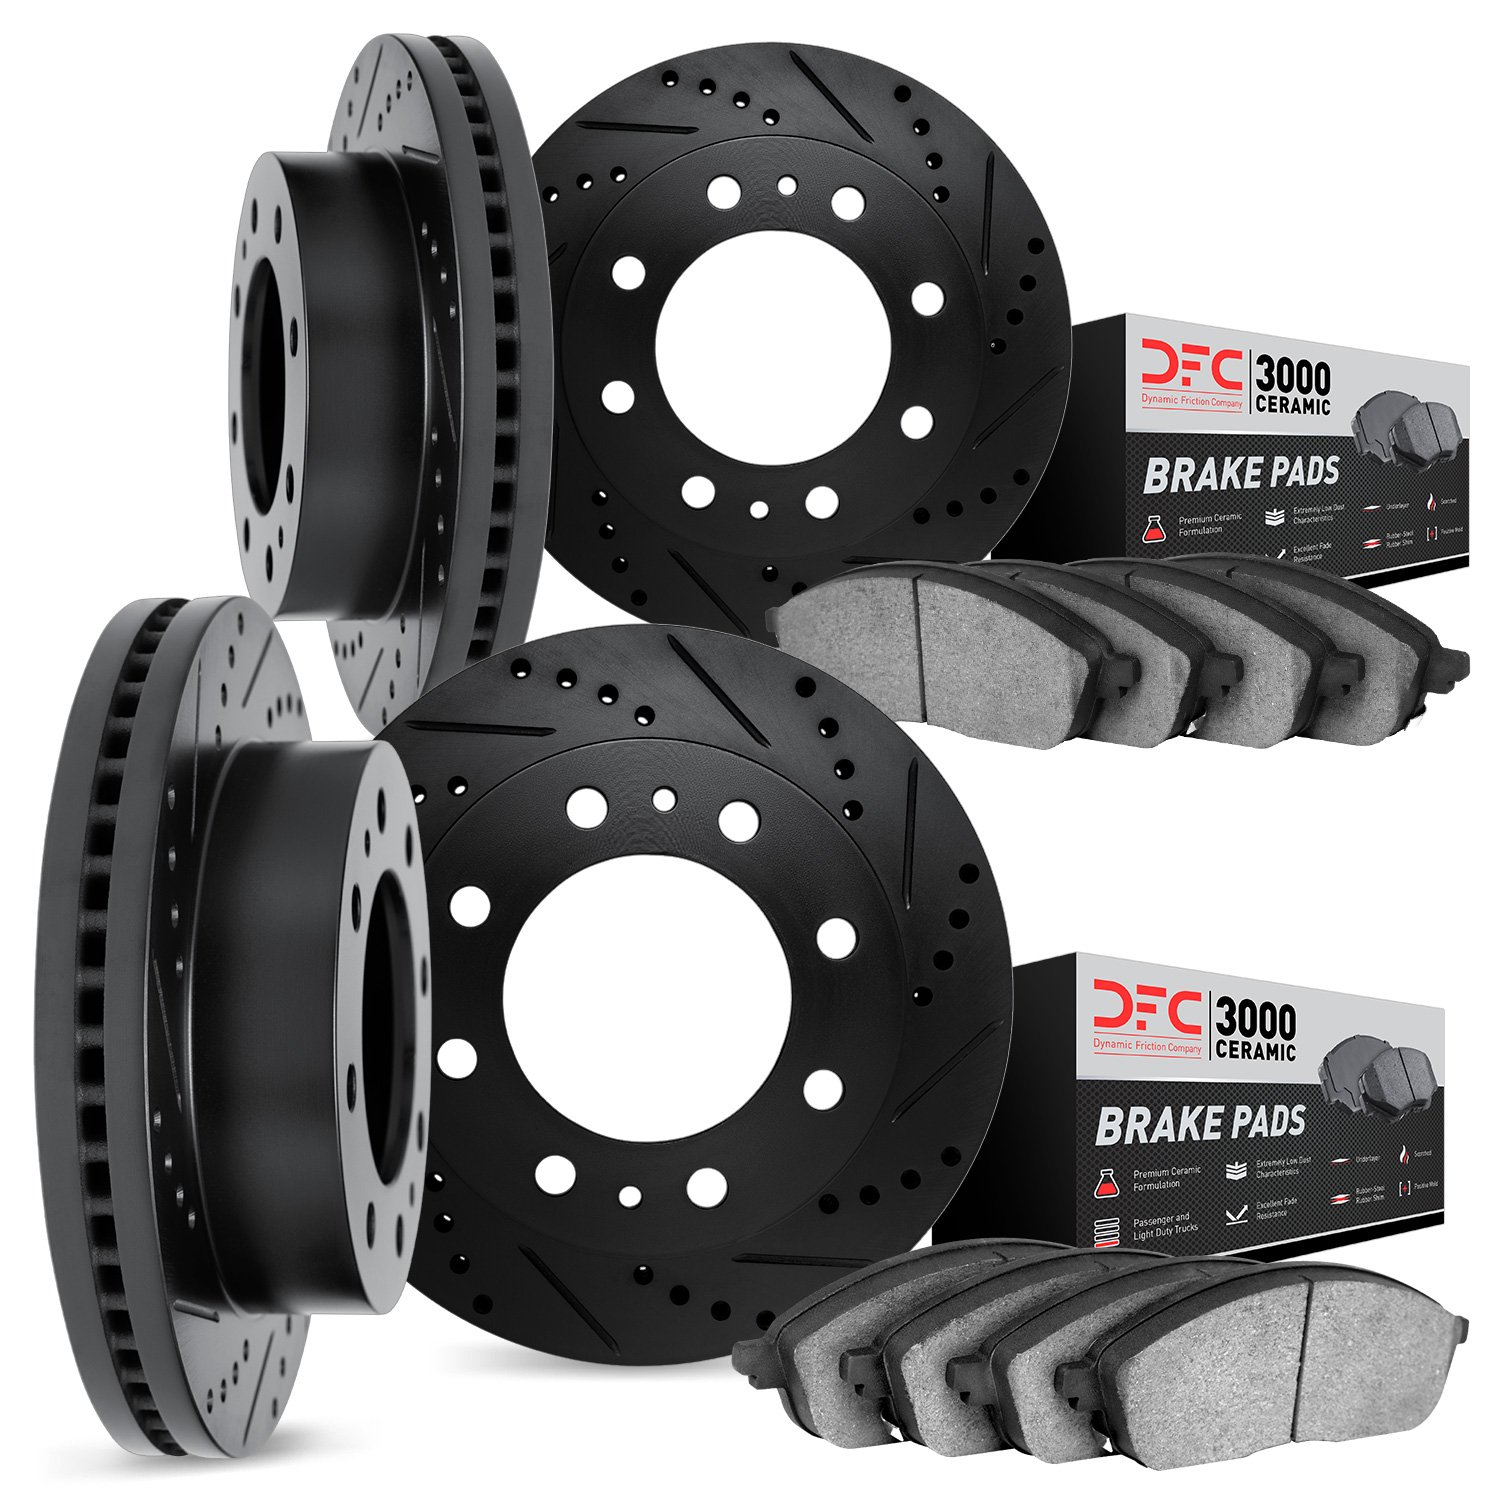 8304-48005 Drilled/Slotted Brake Rotors with 3000-Series Ceramic Brake Pads Kit [Black], 1999-2013 GM, Position: Front and Rear